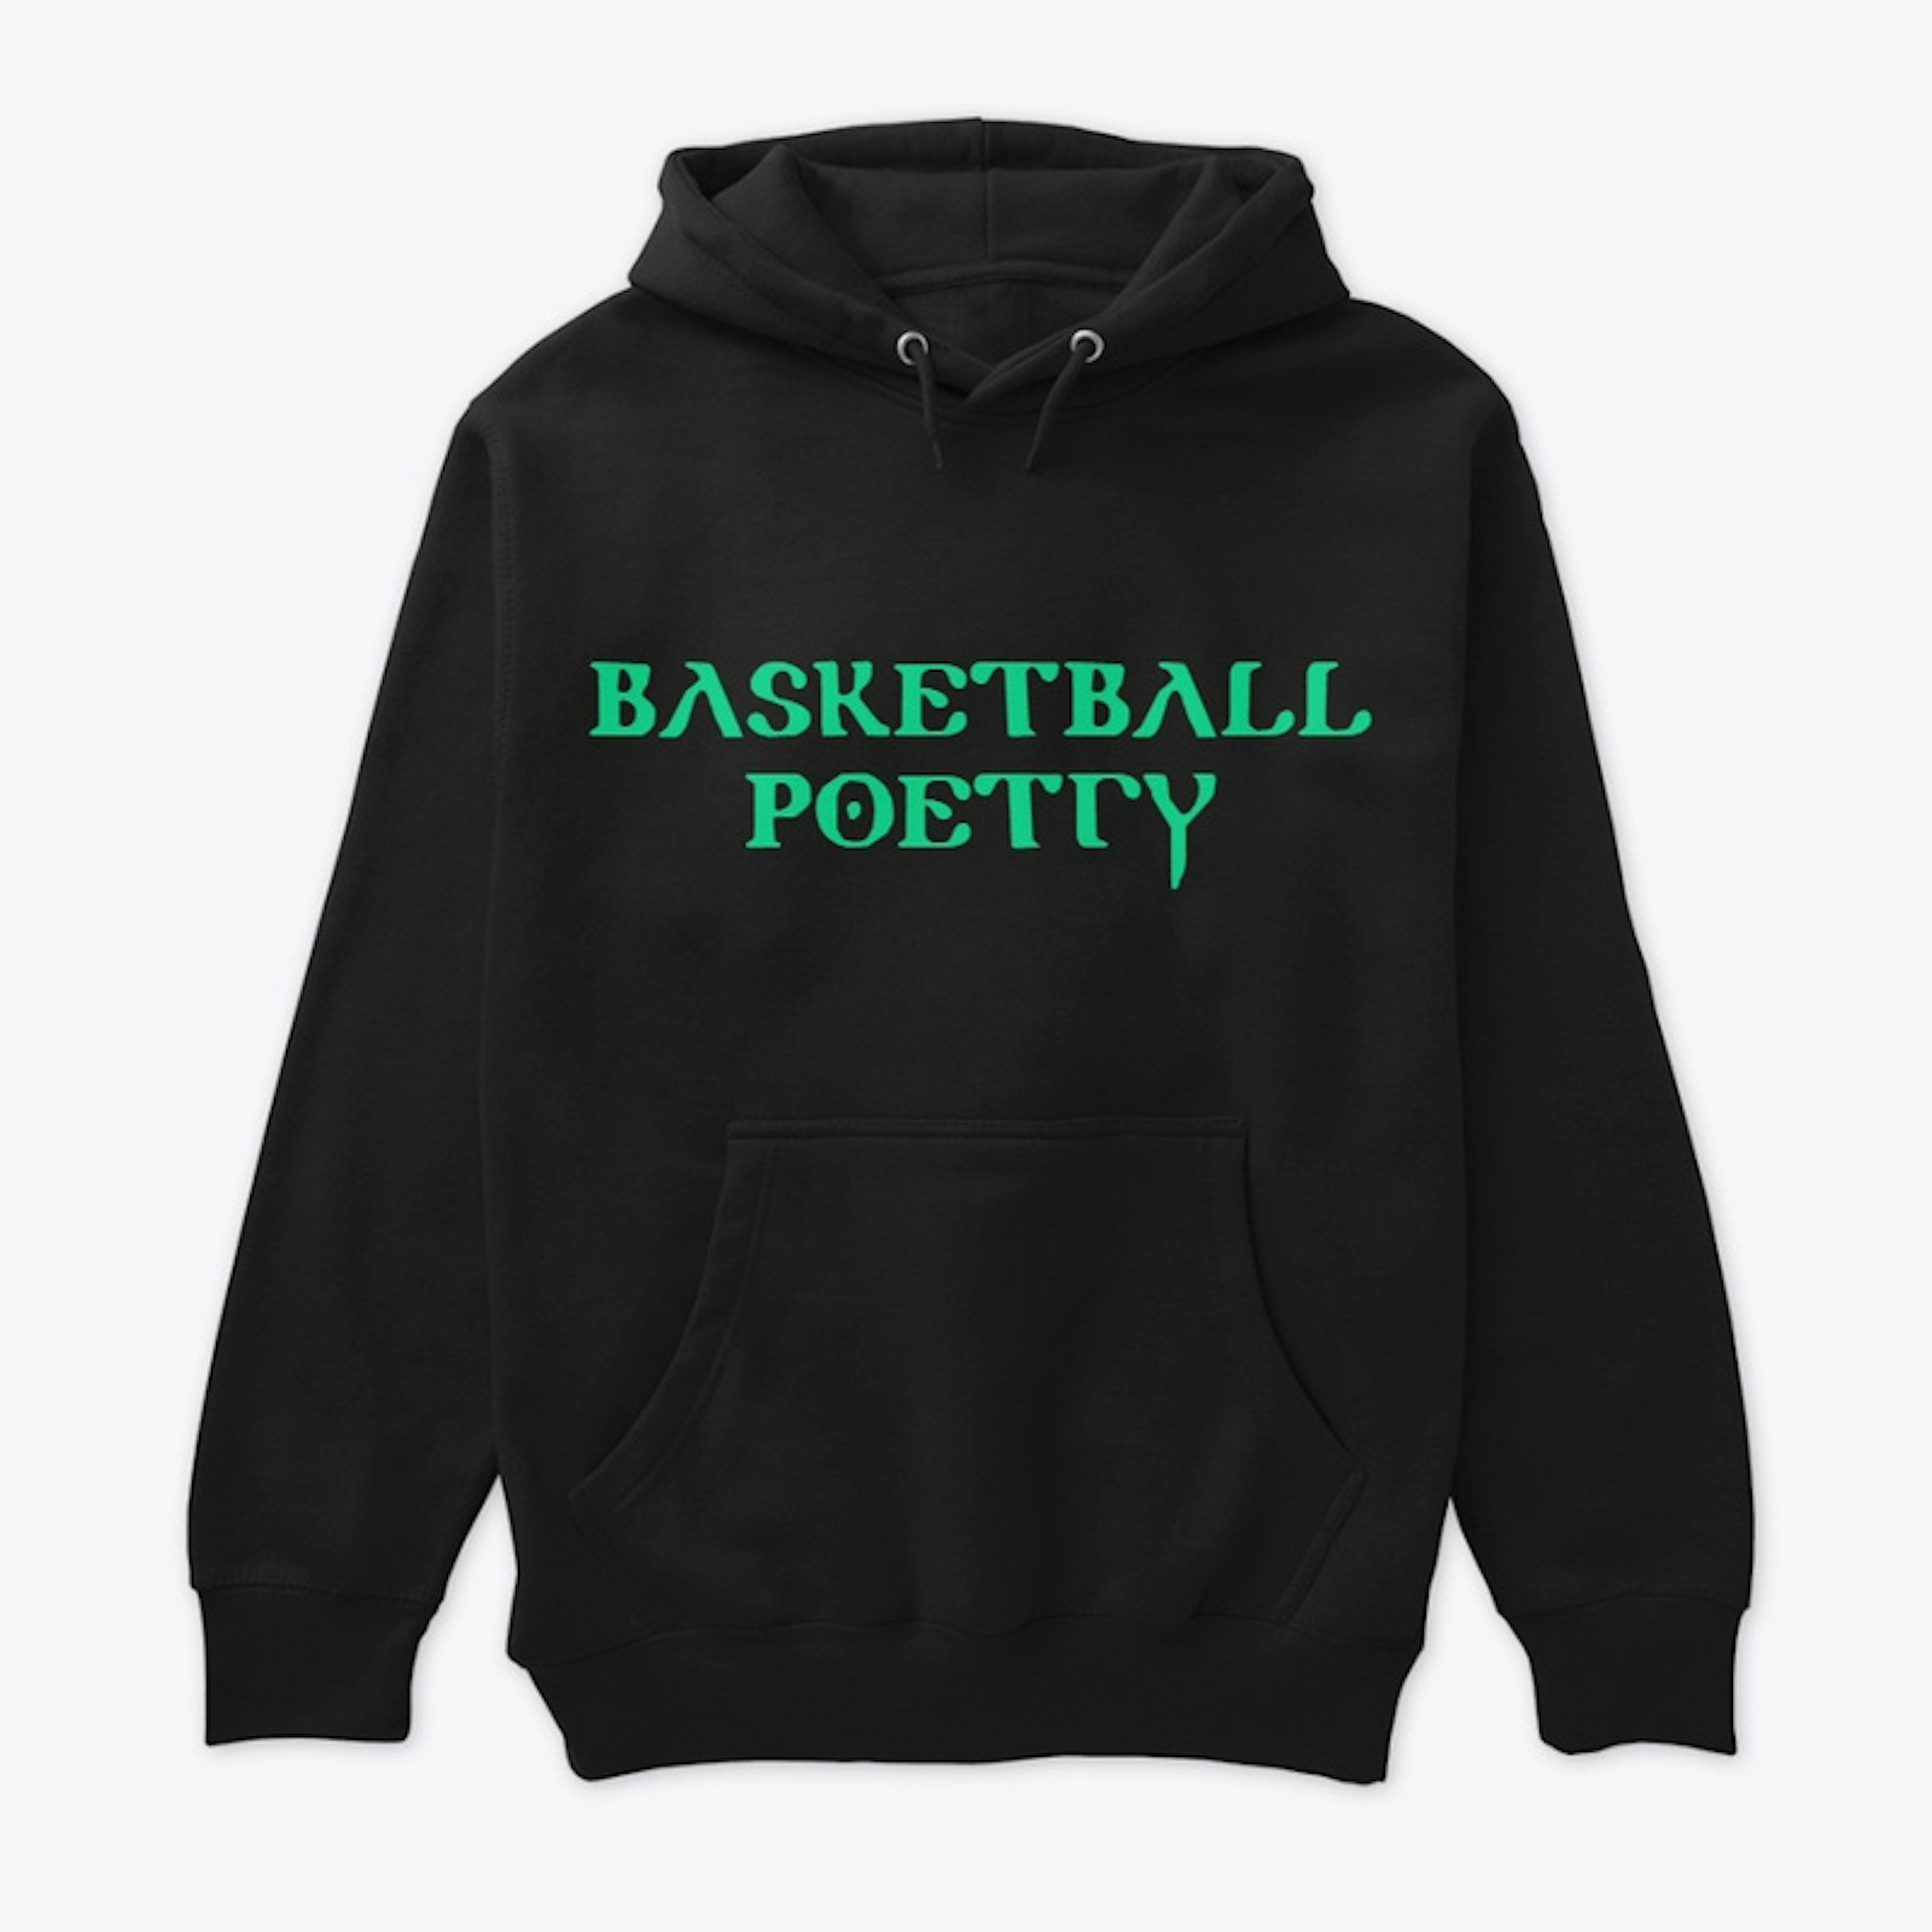 Basketball Poetry (words only)